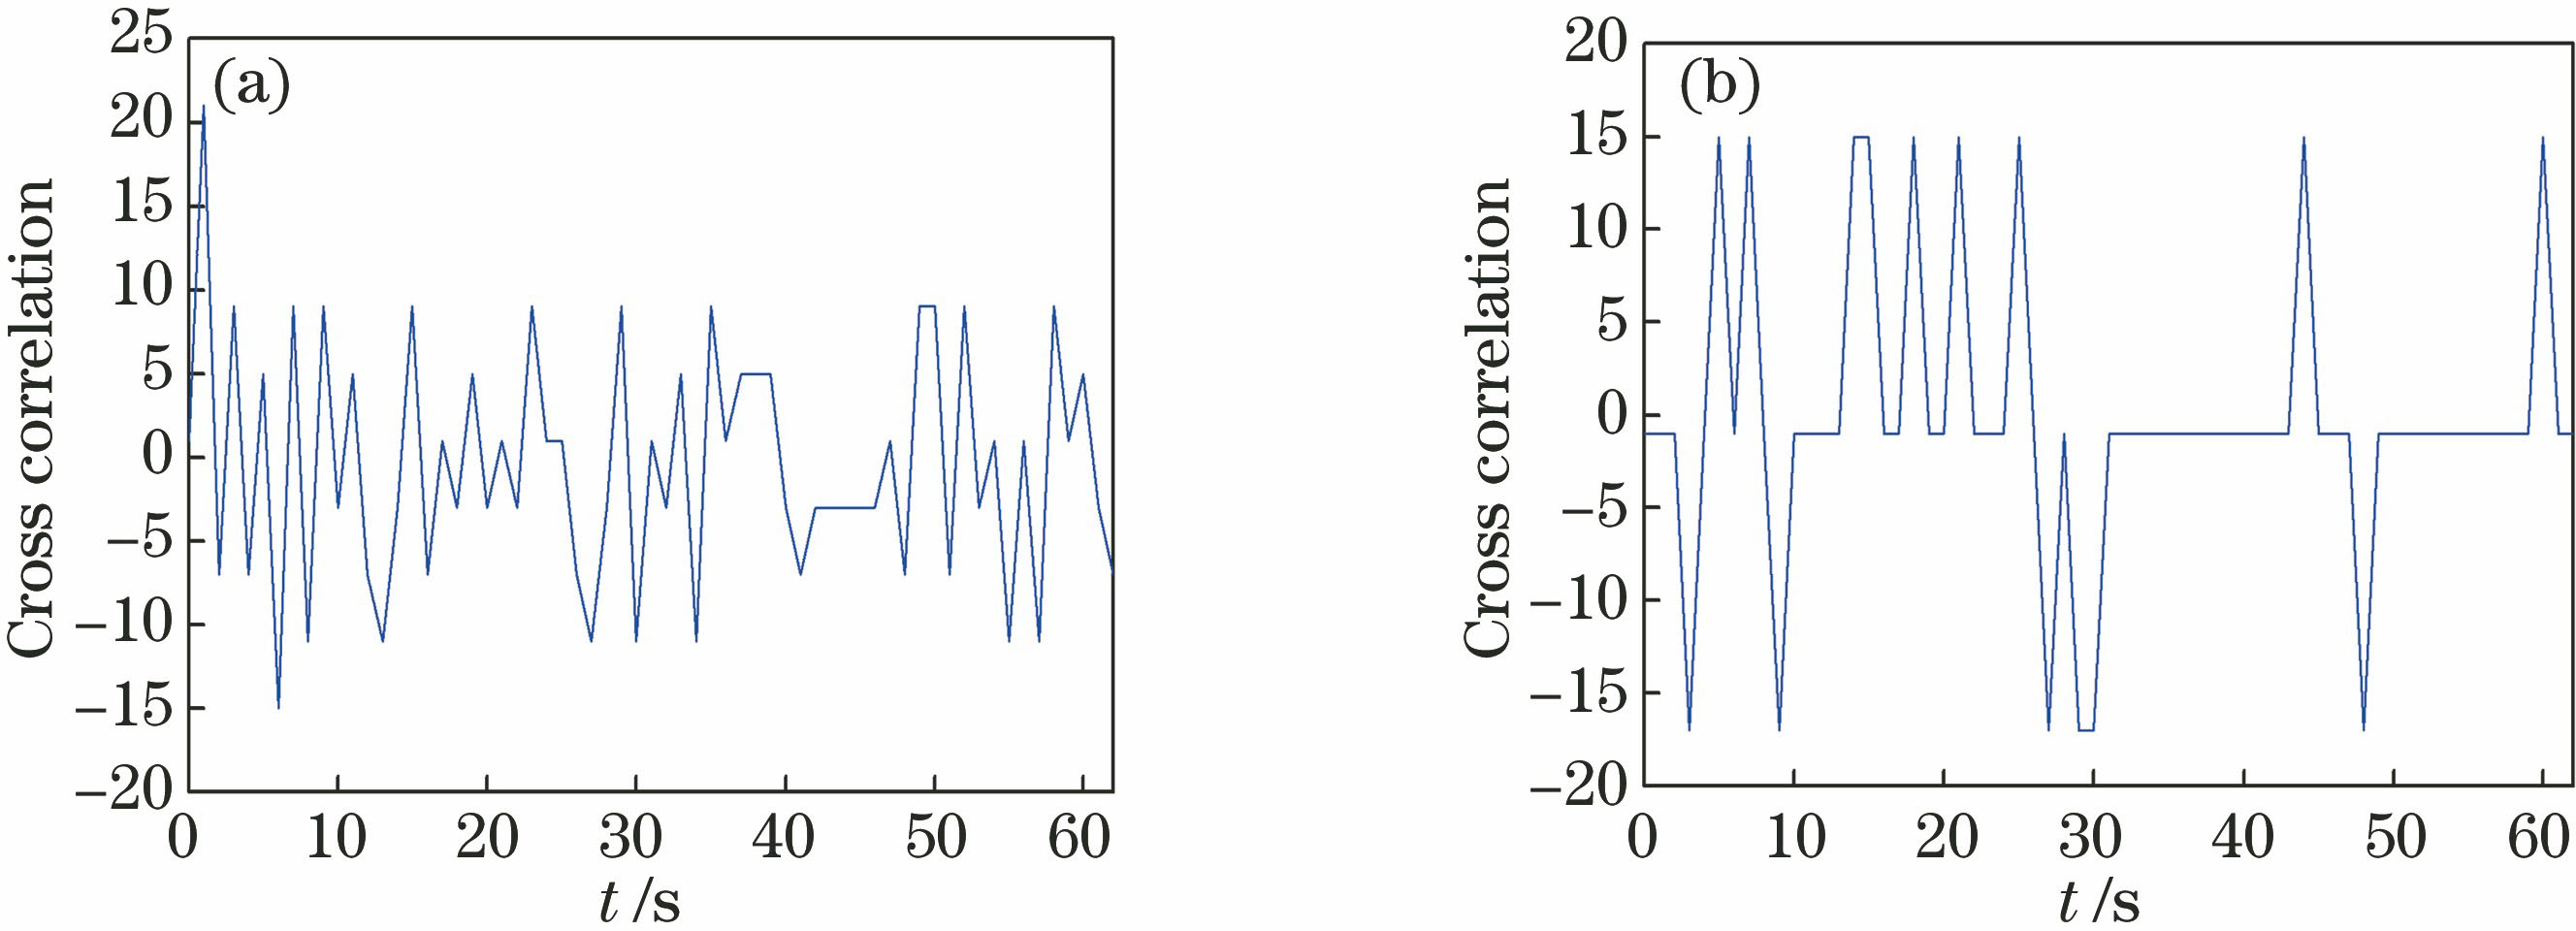 Cross-correlation function of spread spectrum sequence. (a) m sequence; (b) Gold sequence